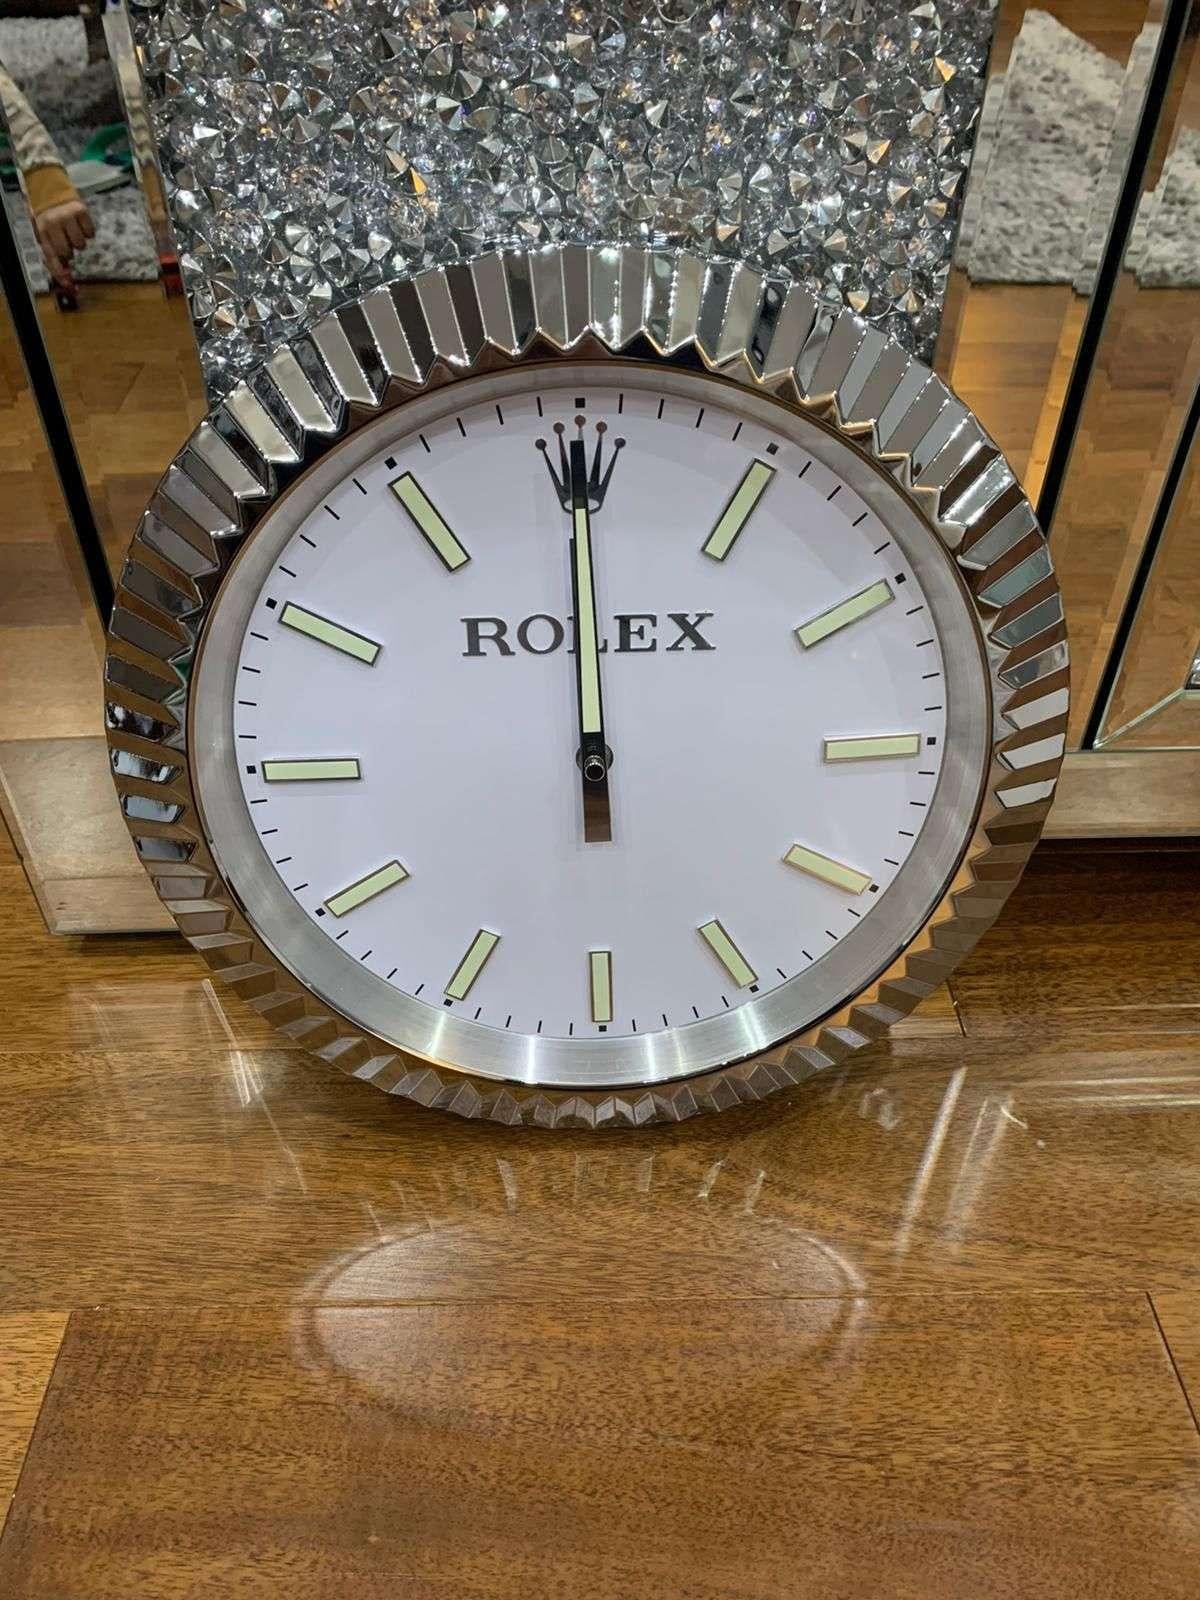 Markers with lume strips. 
Sweeping Quartz movement powered by single AA Battery. 
Clock dimensions measure approximately 34cm by 5cm / 13.5 inch by 2 inch.
ROLEX Officially Certified Datejust Presidential Chrome Wall Clock 
Good condition,